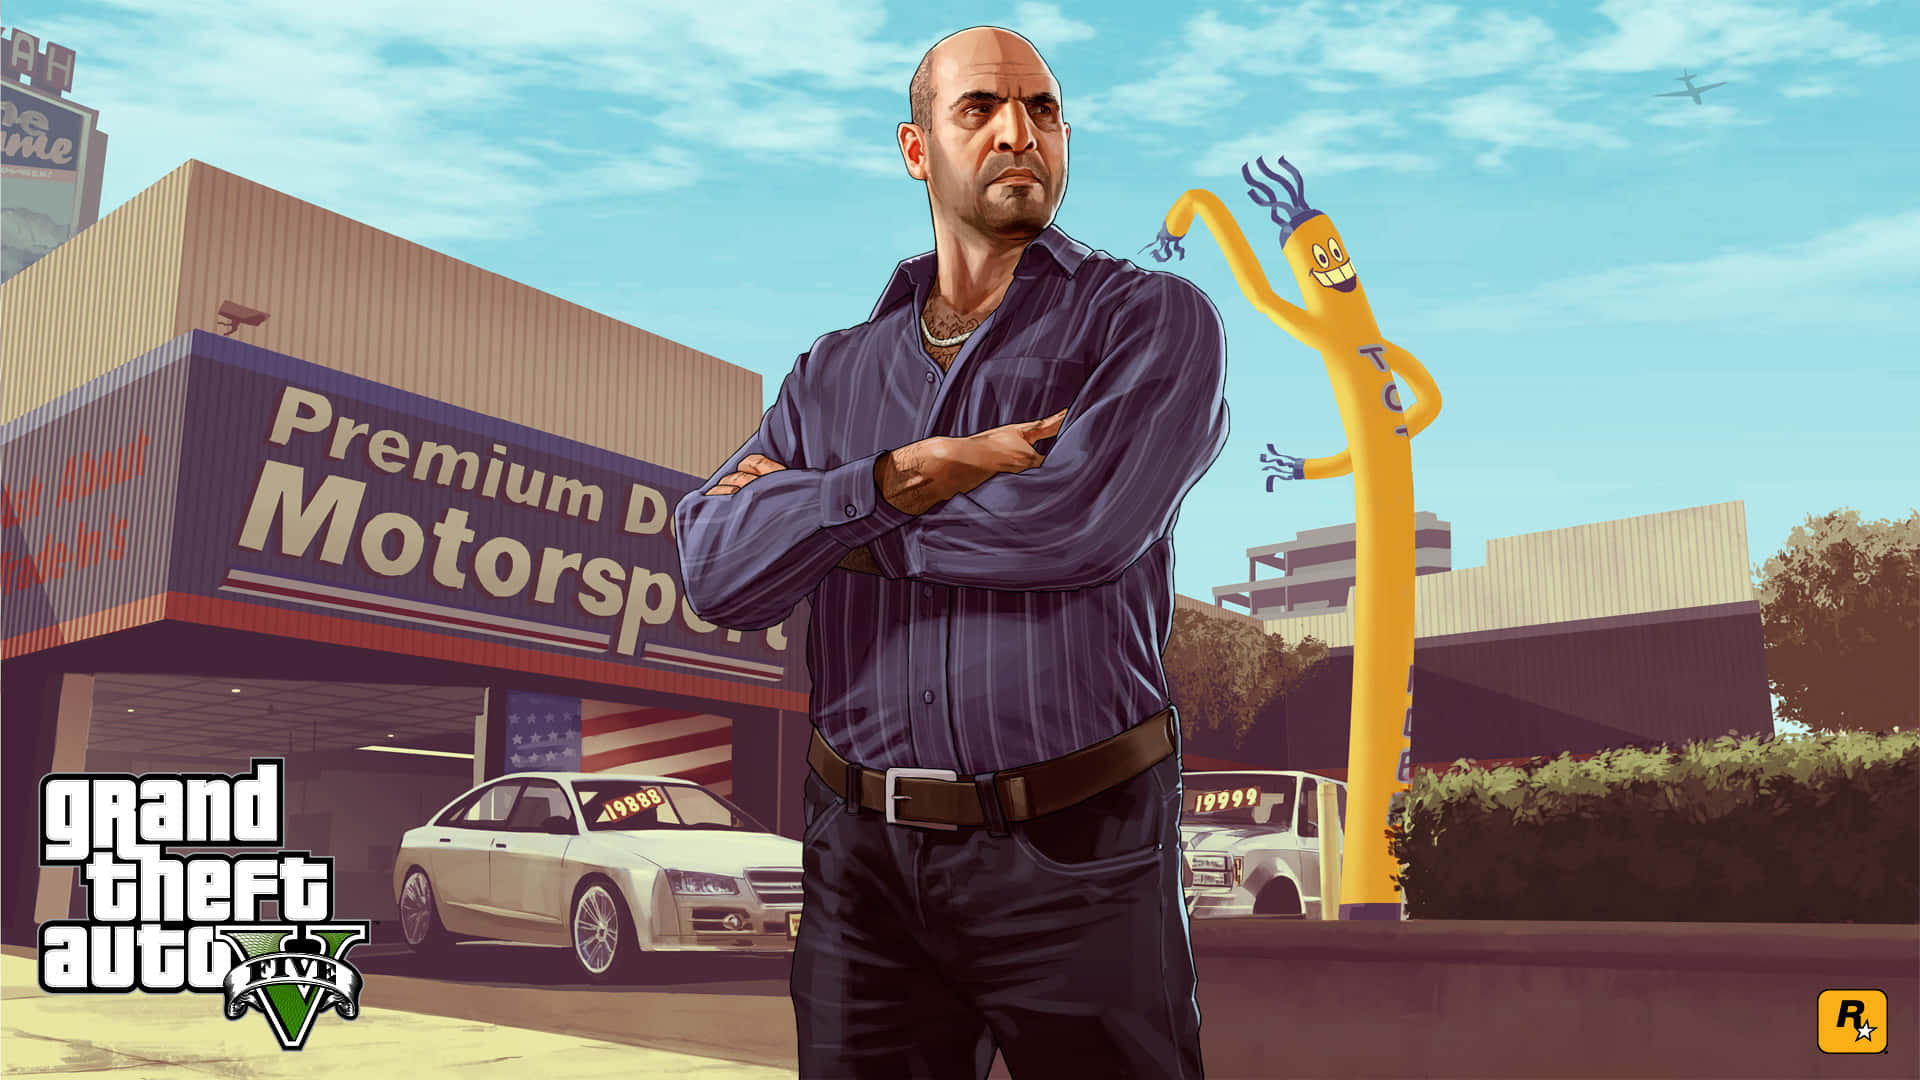 Explore San Andreas in the ultimate online gaming experience – GTA Online! Wallpaper